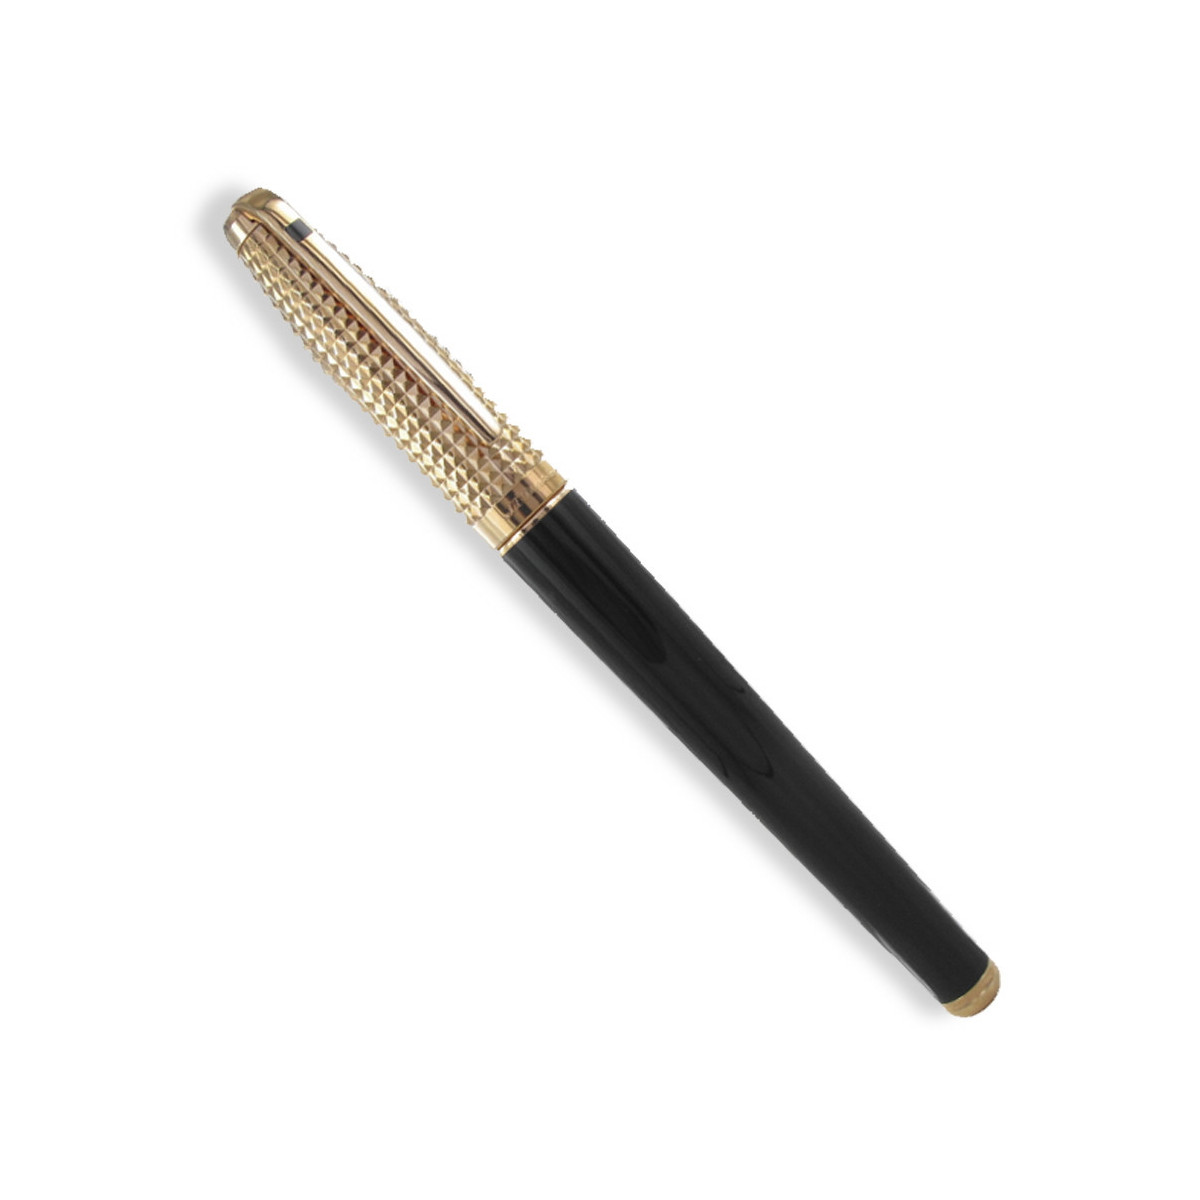 OLYMPO BLACK LACQUER PEN